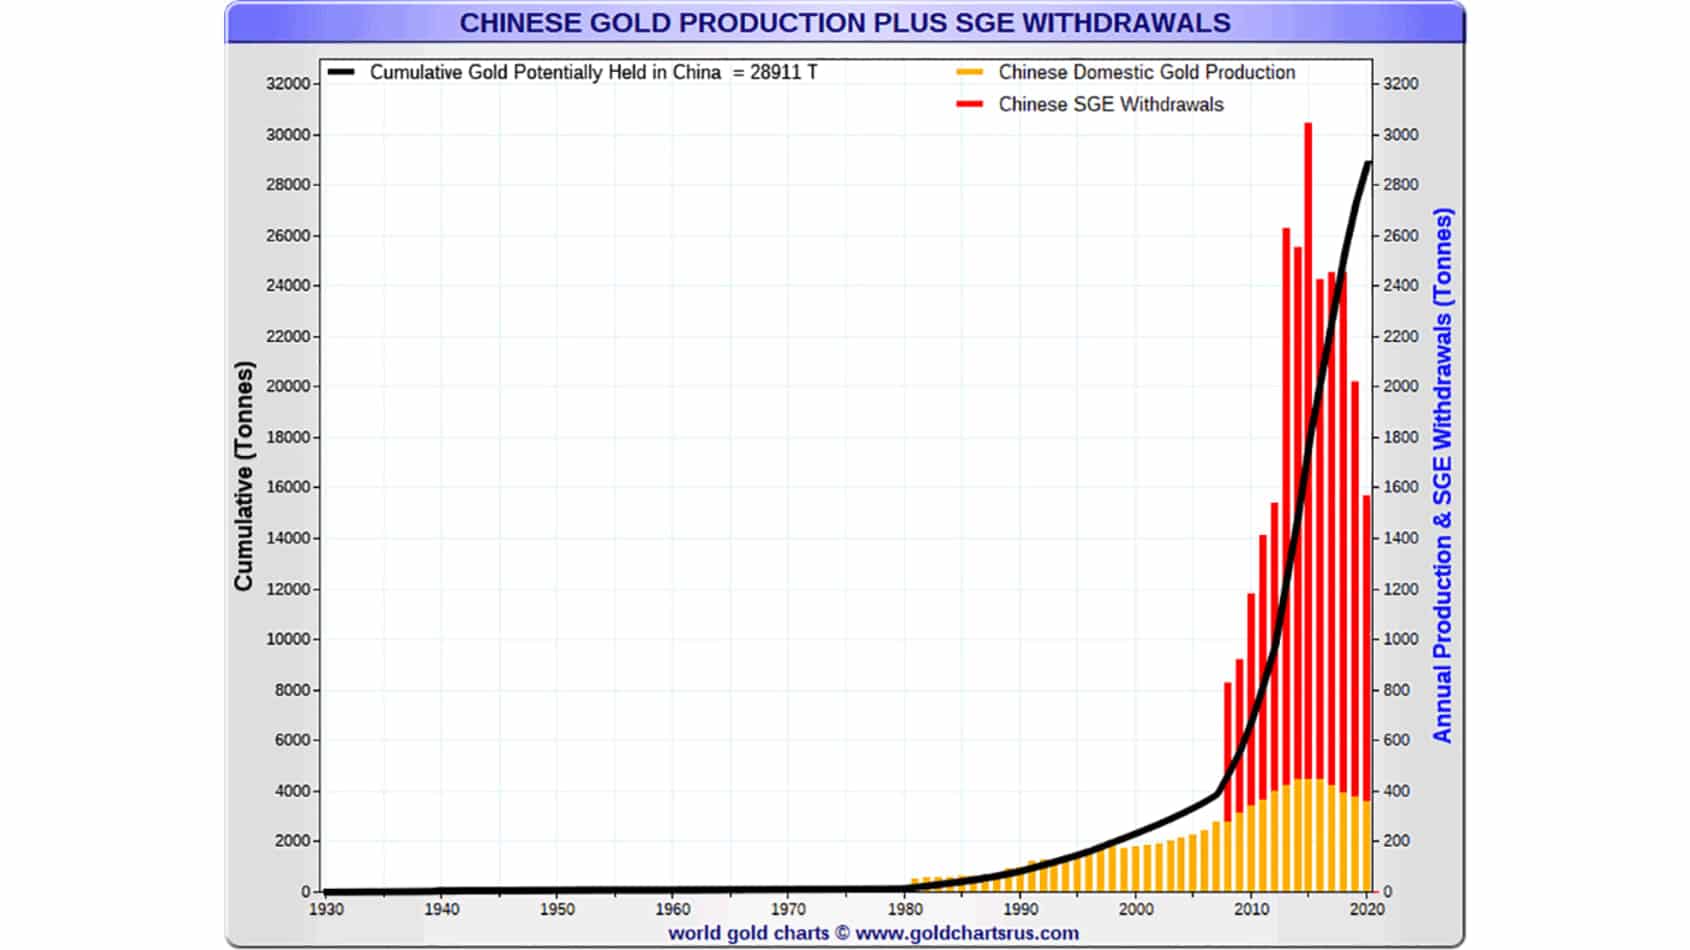 China’s official gold reserve numbers only tell part of the truth. When adding China’s gold production and gold acquired with the Shanghai Gold Exchange, their actual gold reserves are much higher.